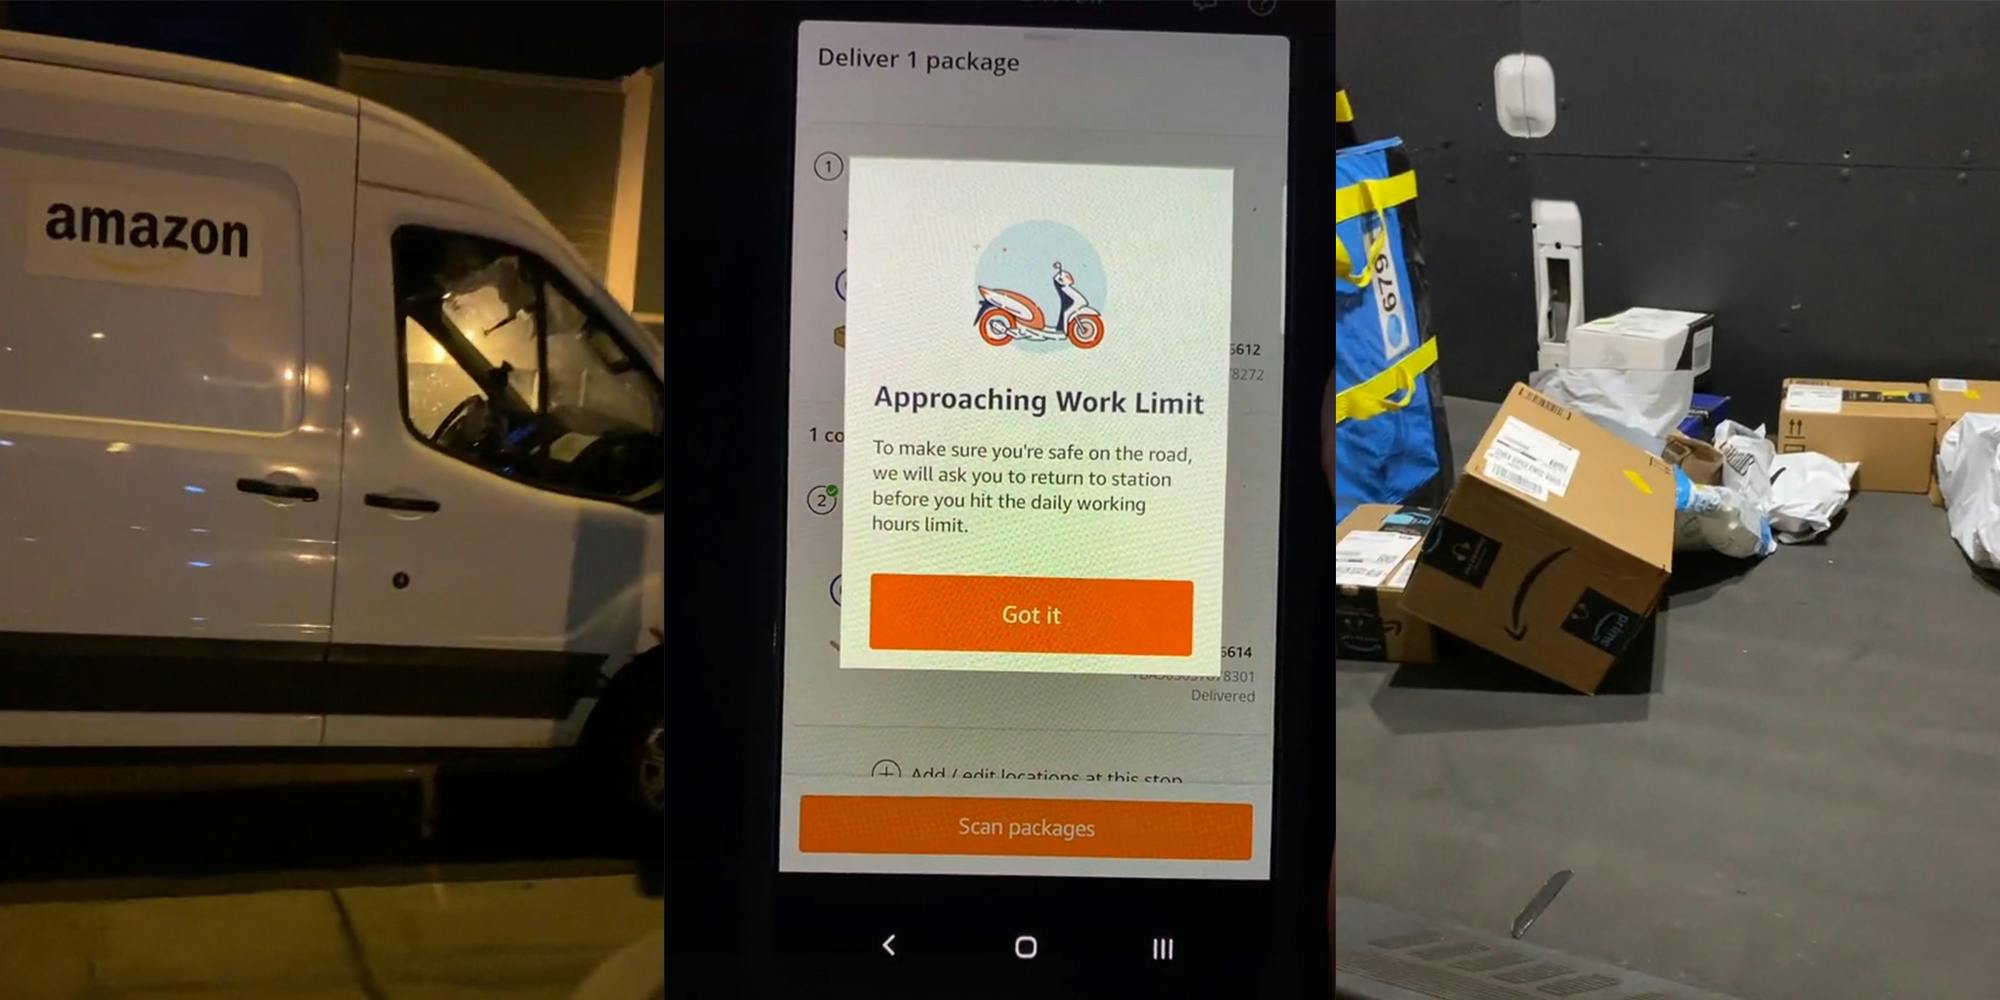 amazon delivery van (l) "approaching work limit" warning screen on device (c) packages in back of Amazon van (r)